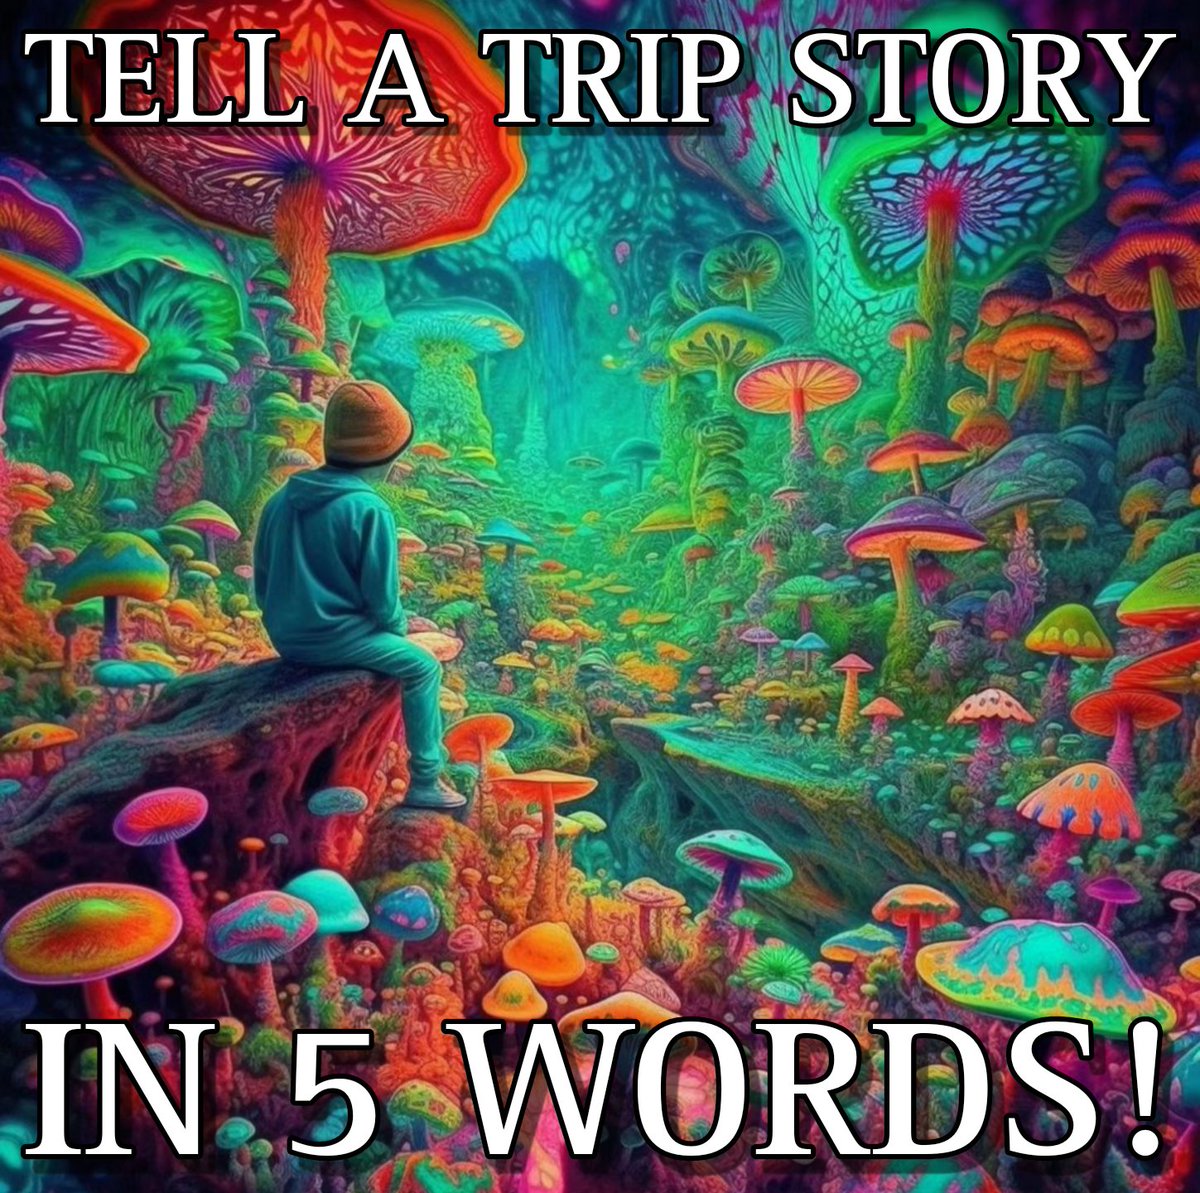 Tell me a trip story in 5 words! 👇